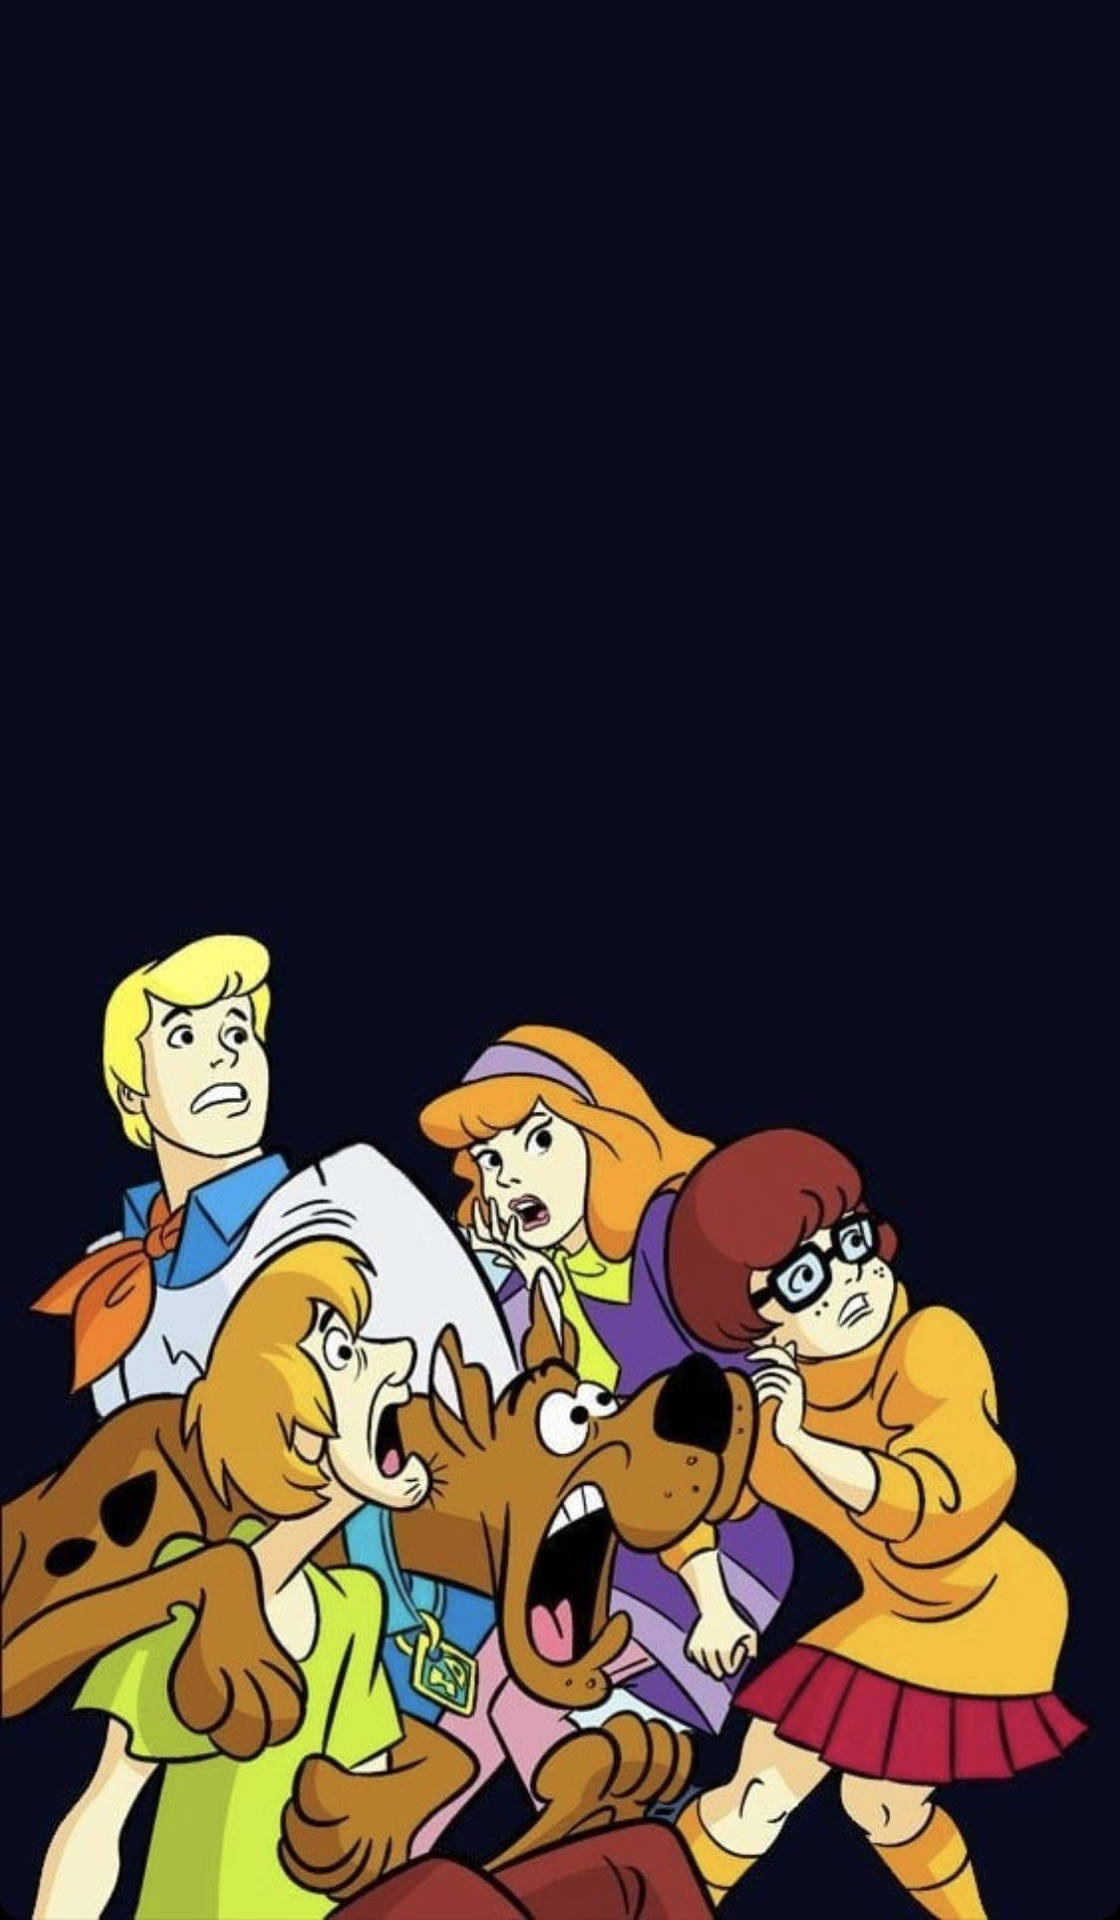 Energetic And Mystery-solving Scooby Doo Poster